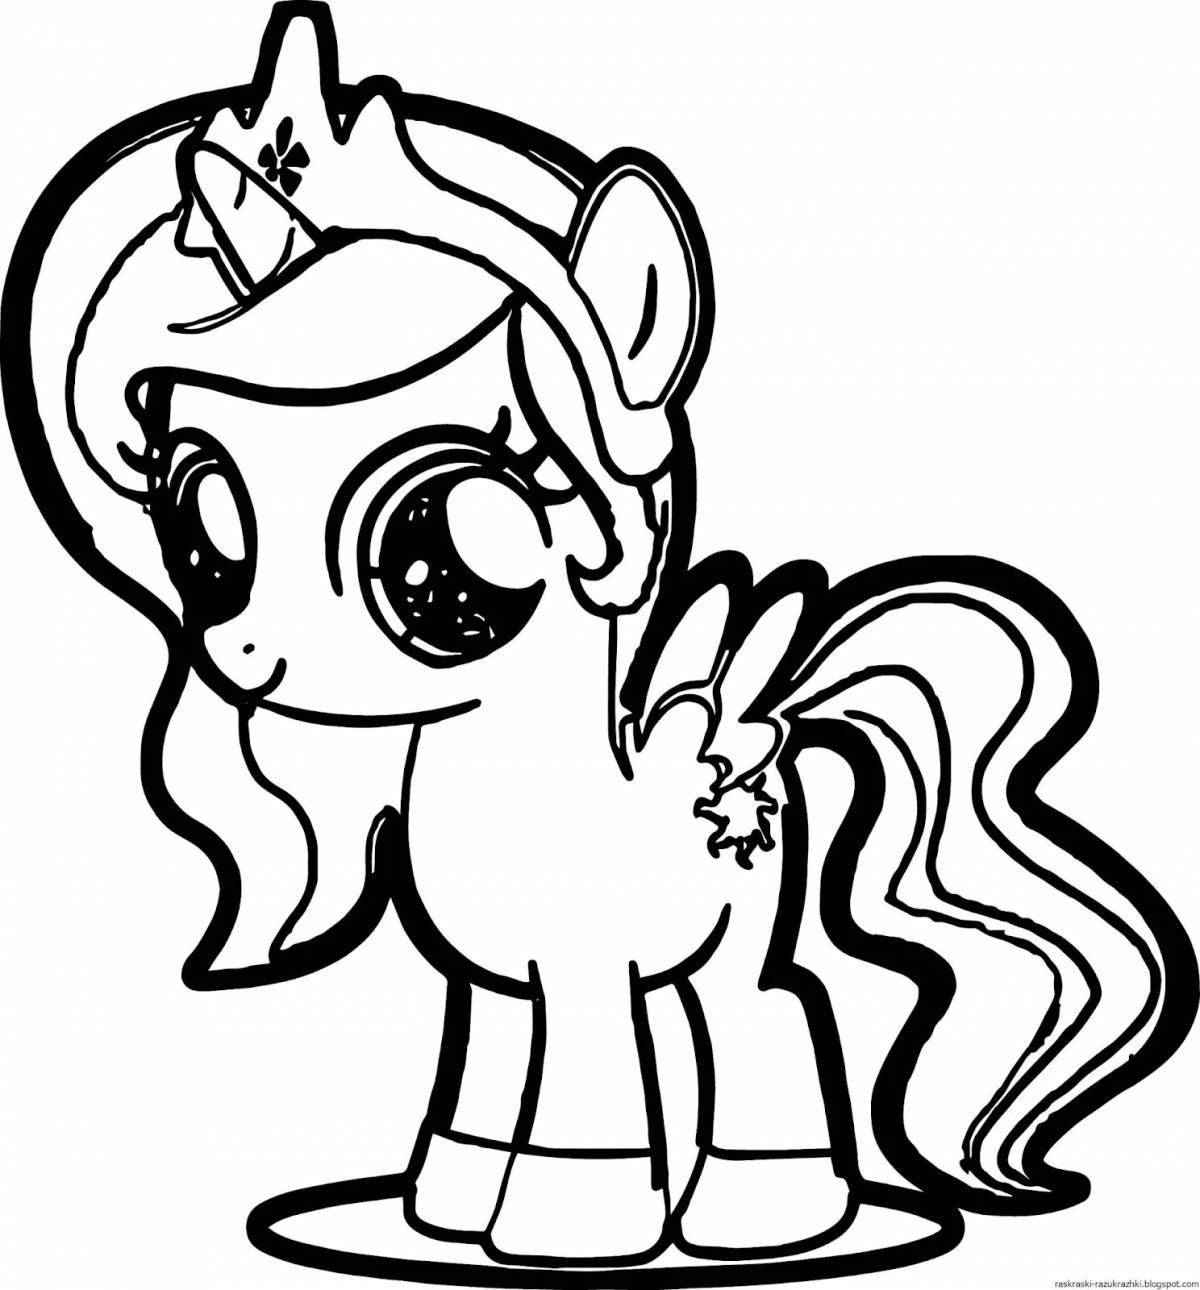 Coloring page happy little pony